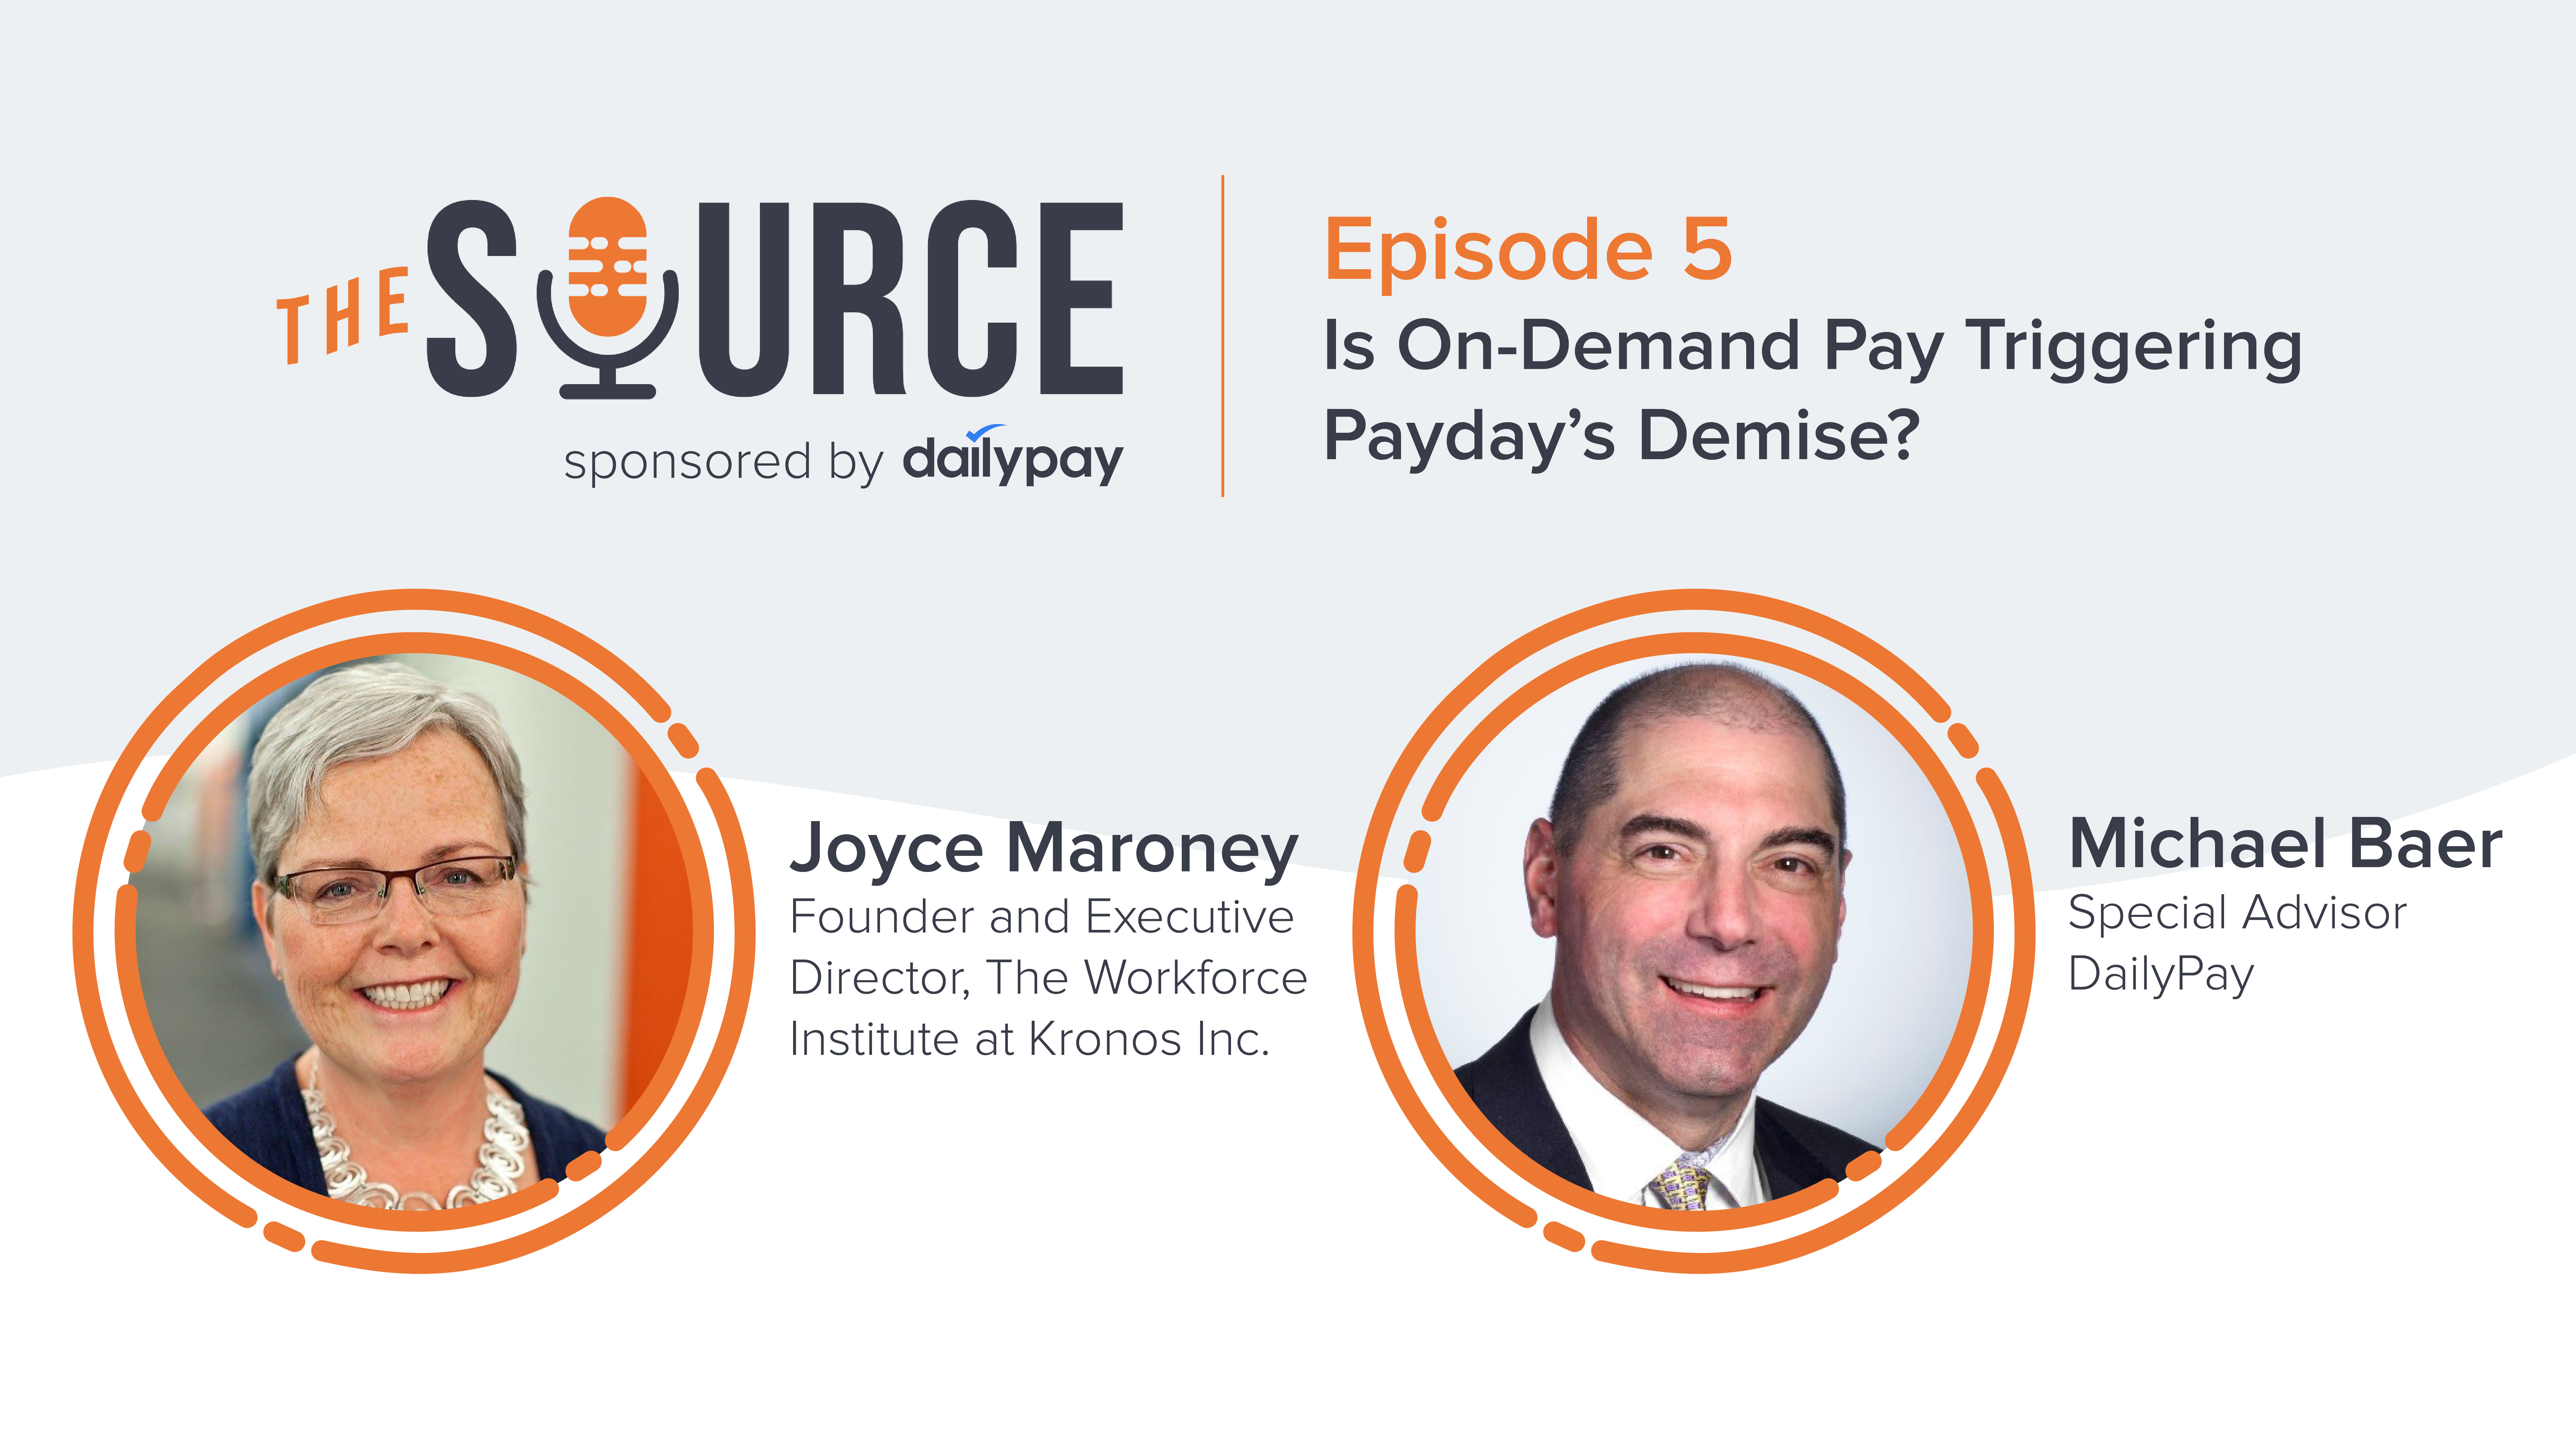 Promotional image for "The Source" podcast Episode 5, featuring guests Joyce Parony, Founder and Executive Director at Kronos Inc., and Michael Baer, Special Advisor at DailyPay, discussing on-demand pay.